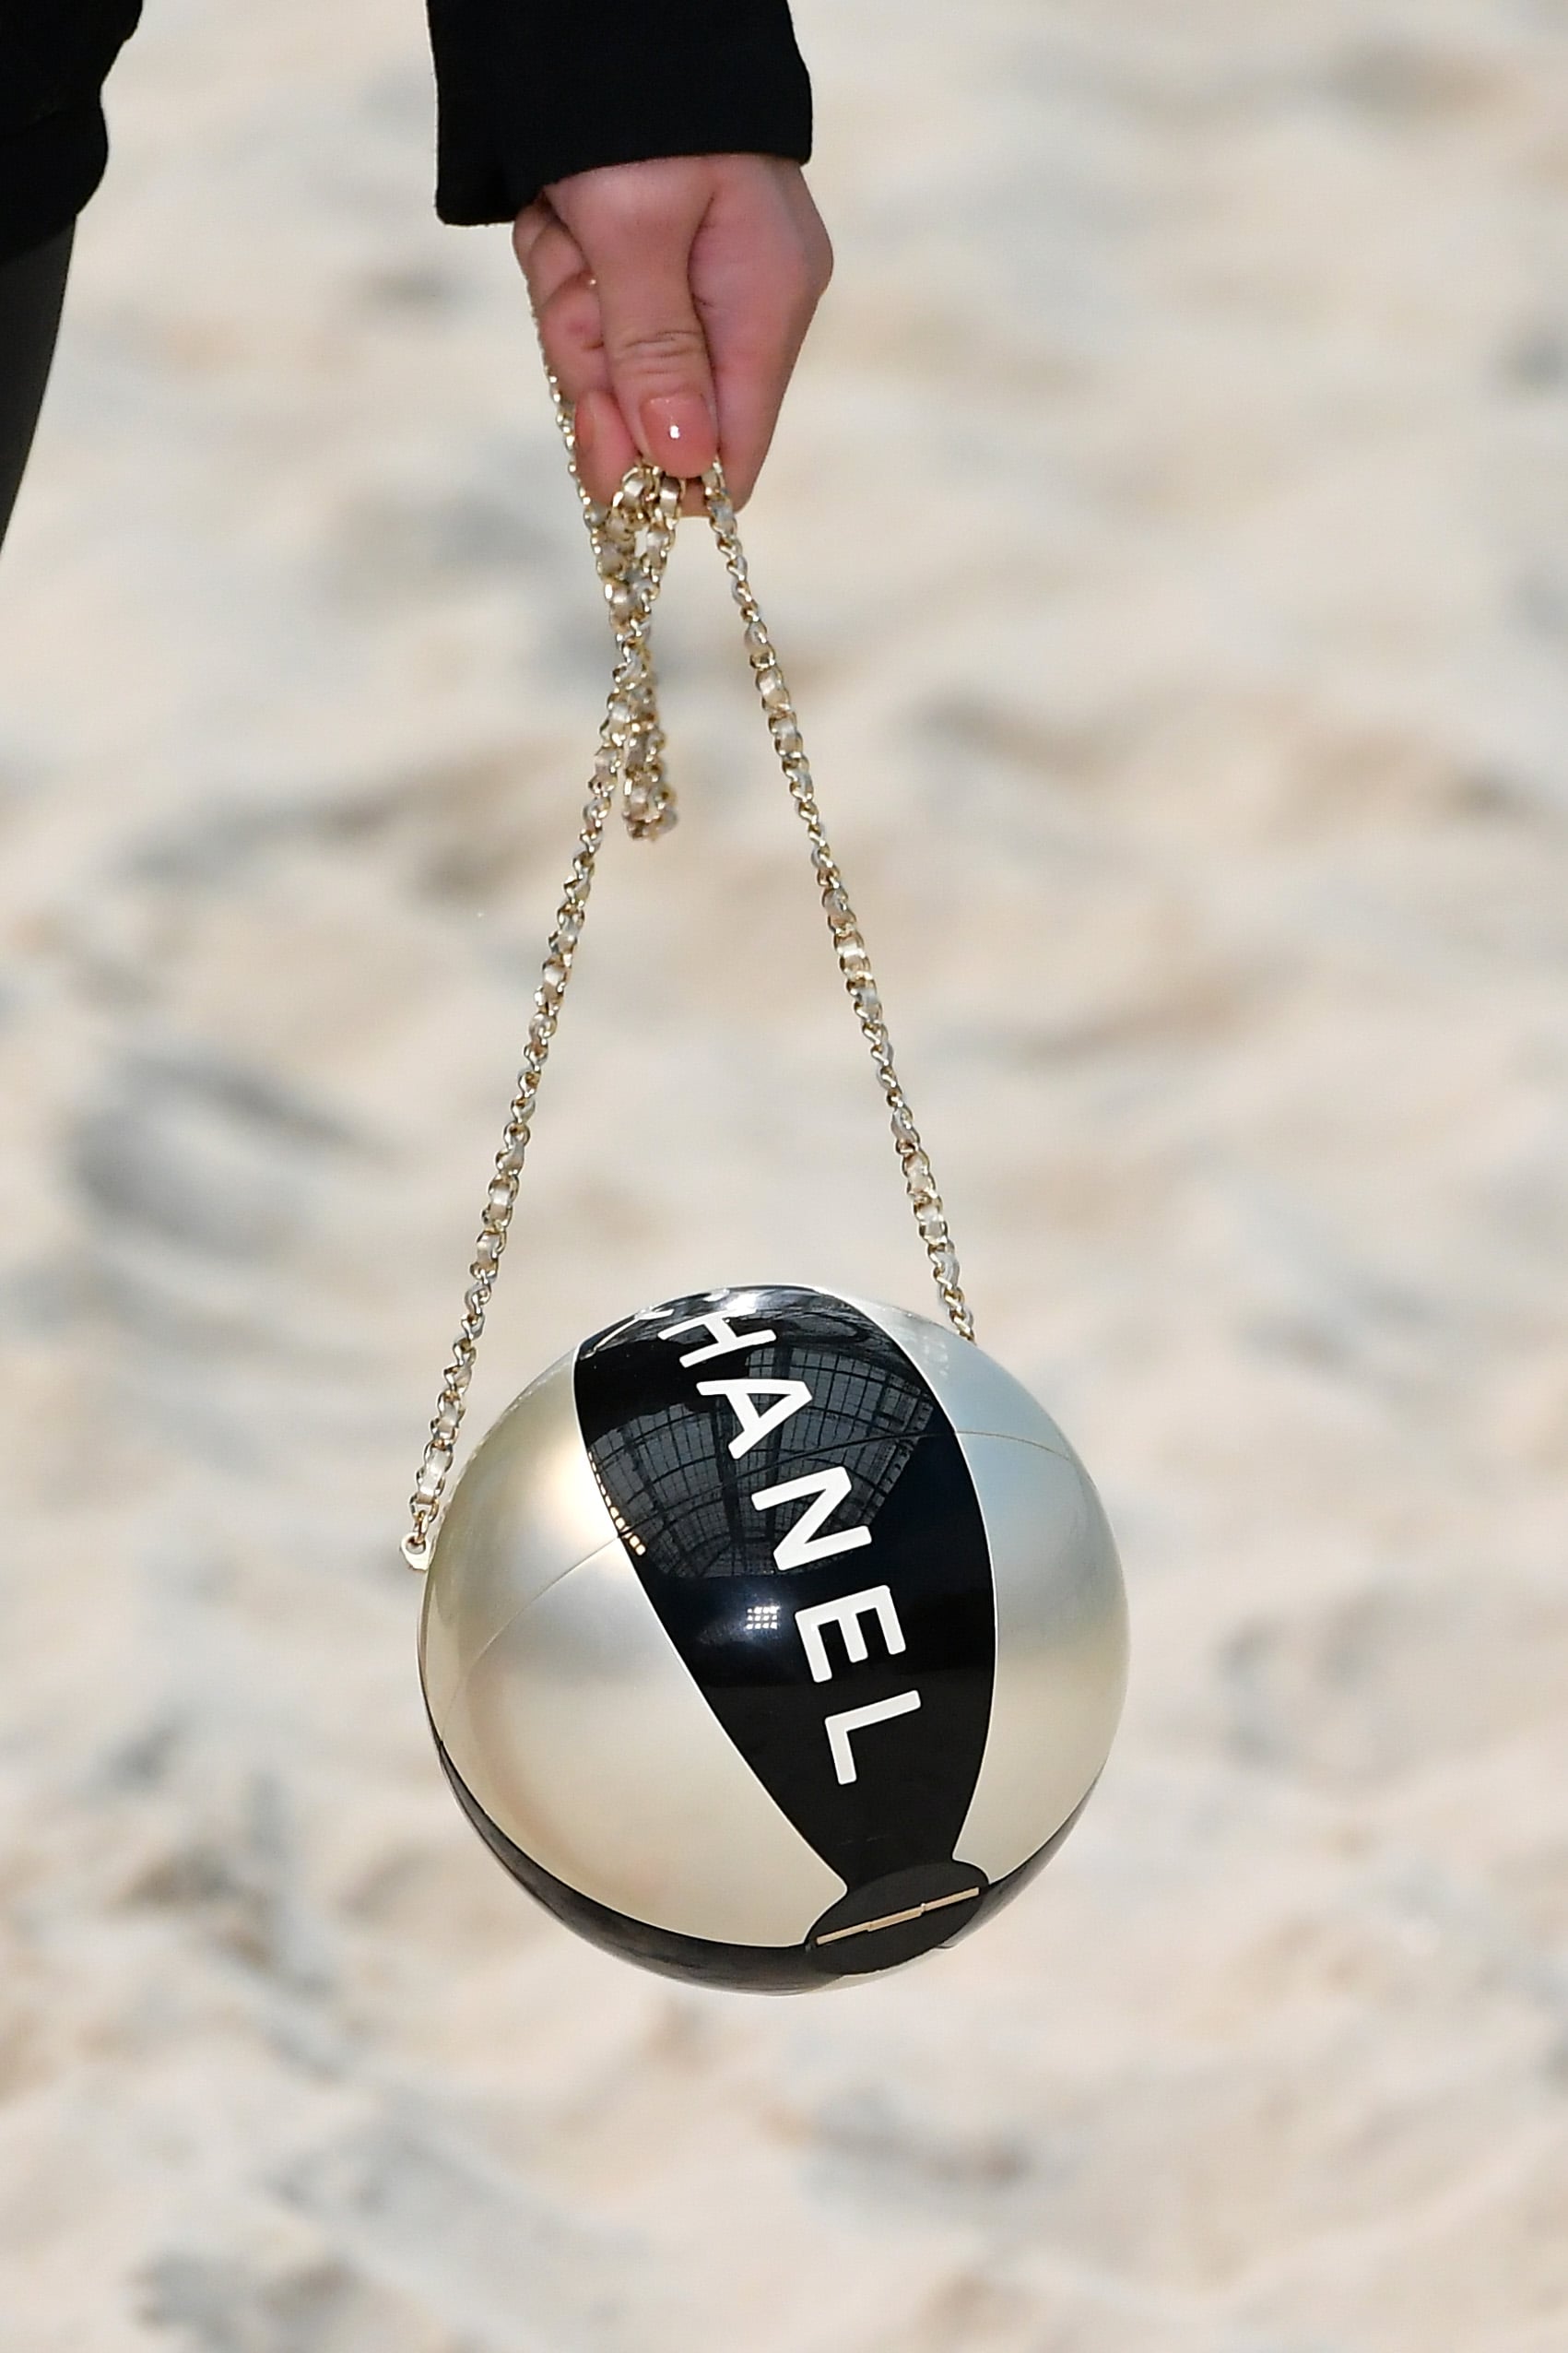 The Chanel Beach Ball Bag  Nothing Will Excite You Like the